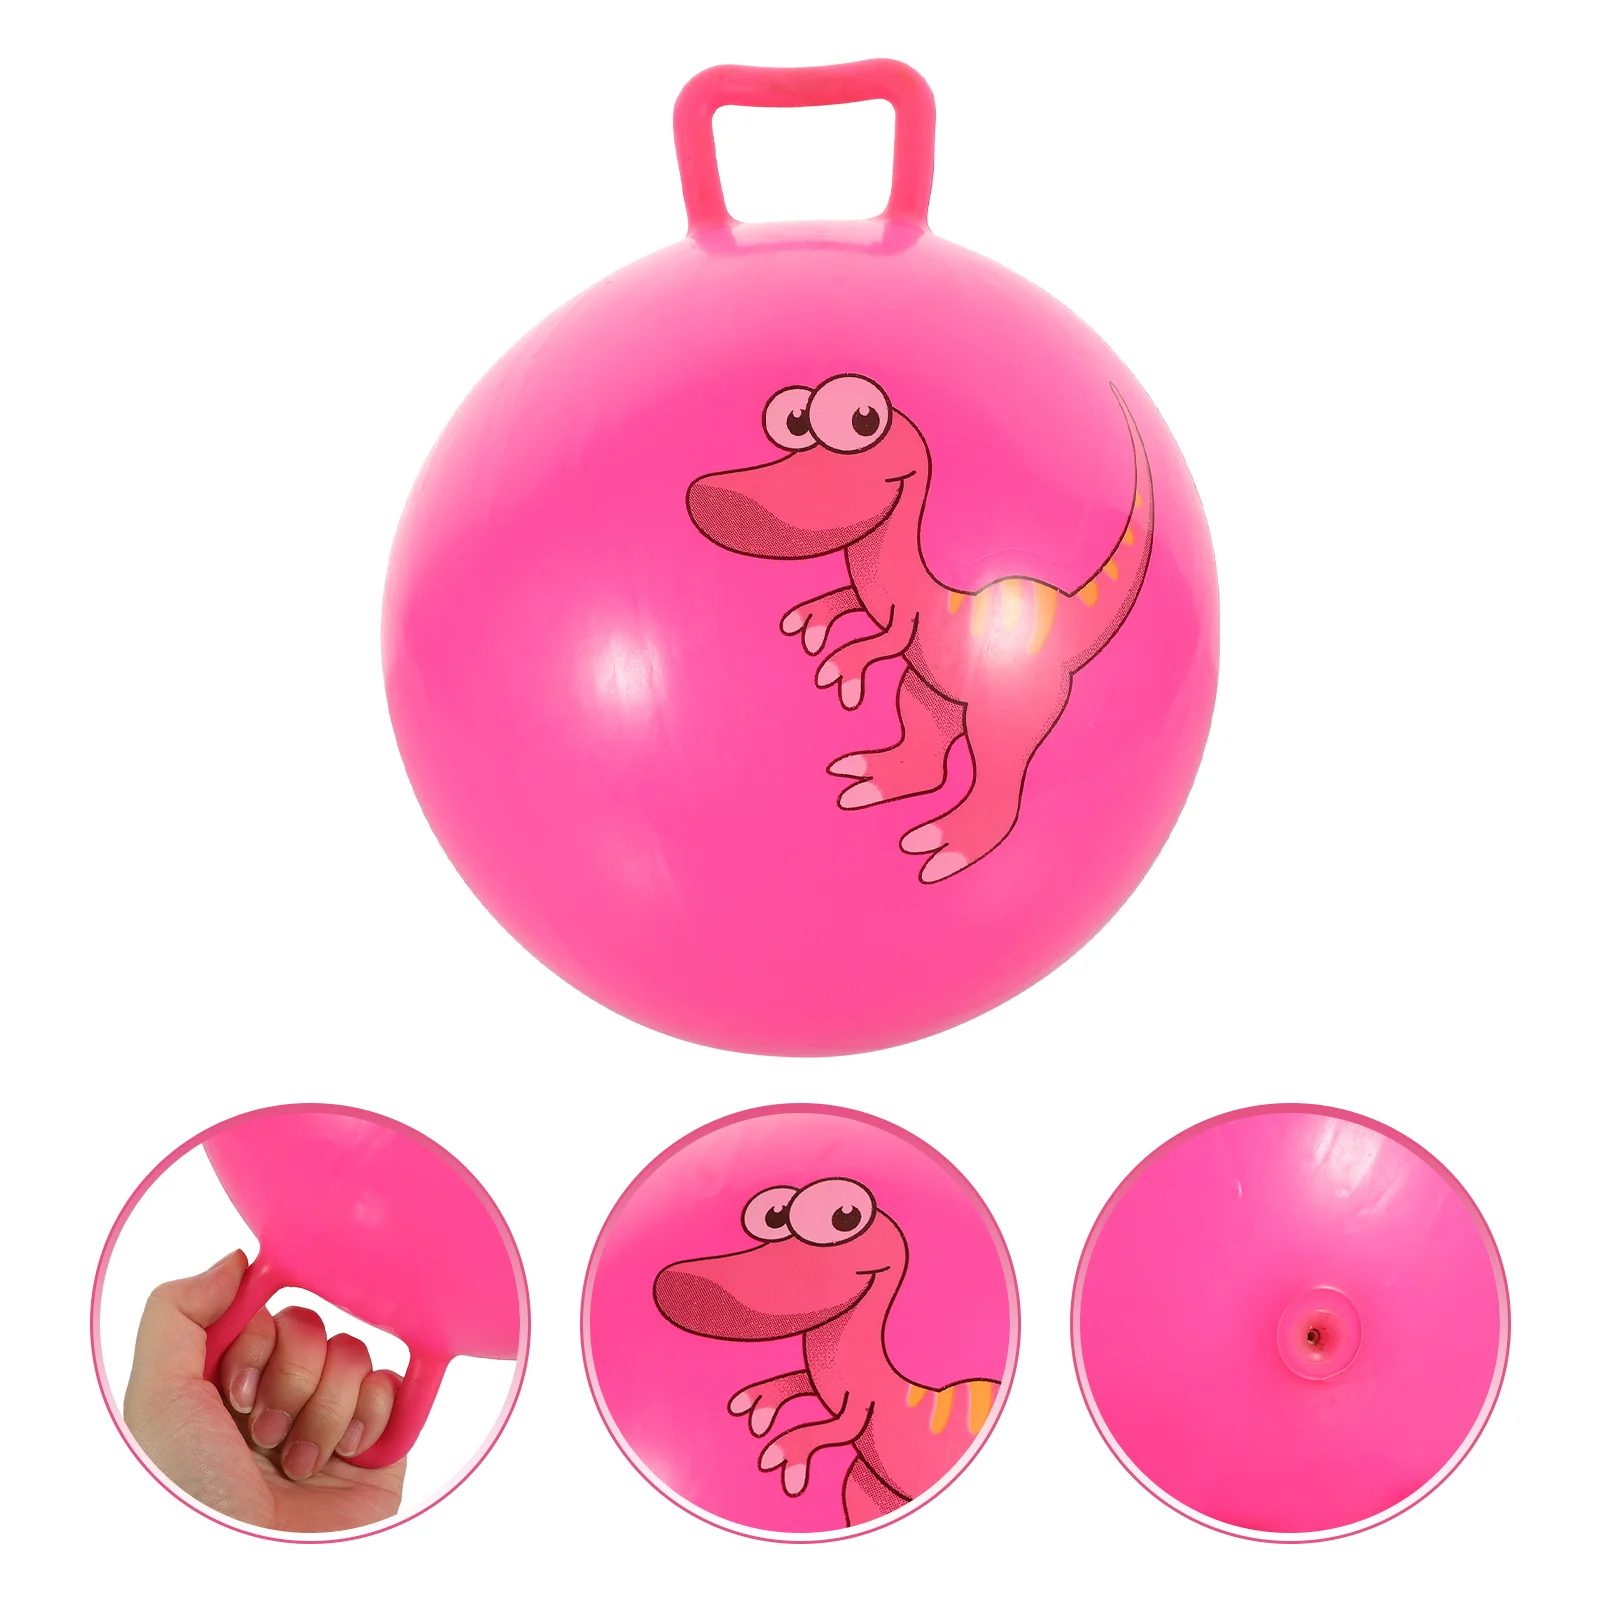 

Hopper Ball Exercise Toy for Kids - 25cm Bouncy Balance Ball with Handle (Random Color)